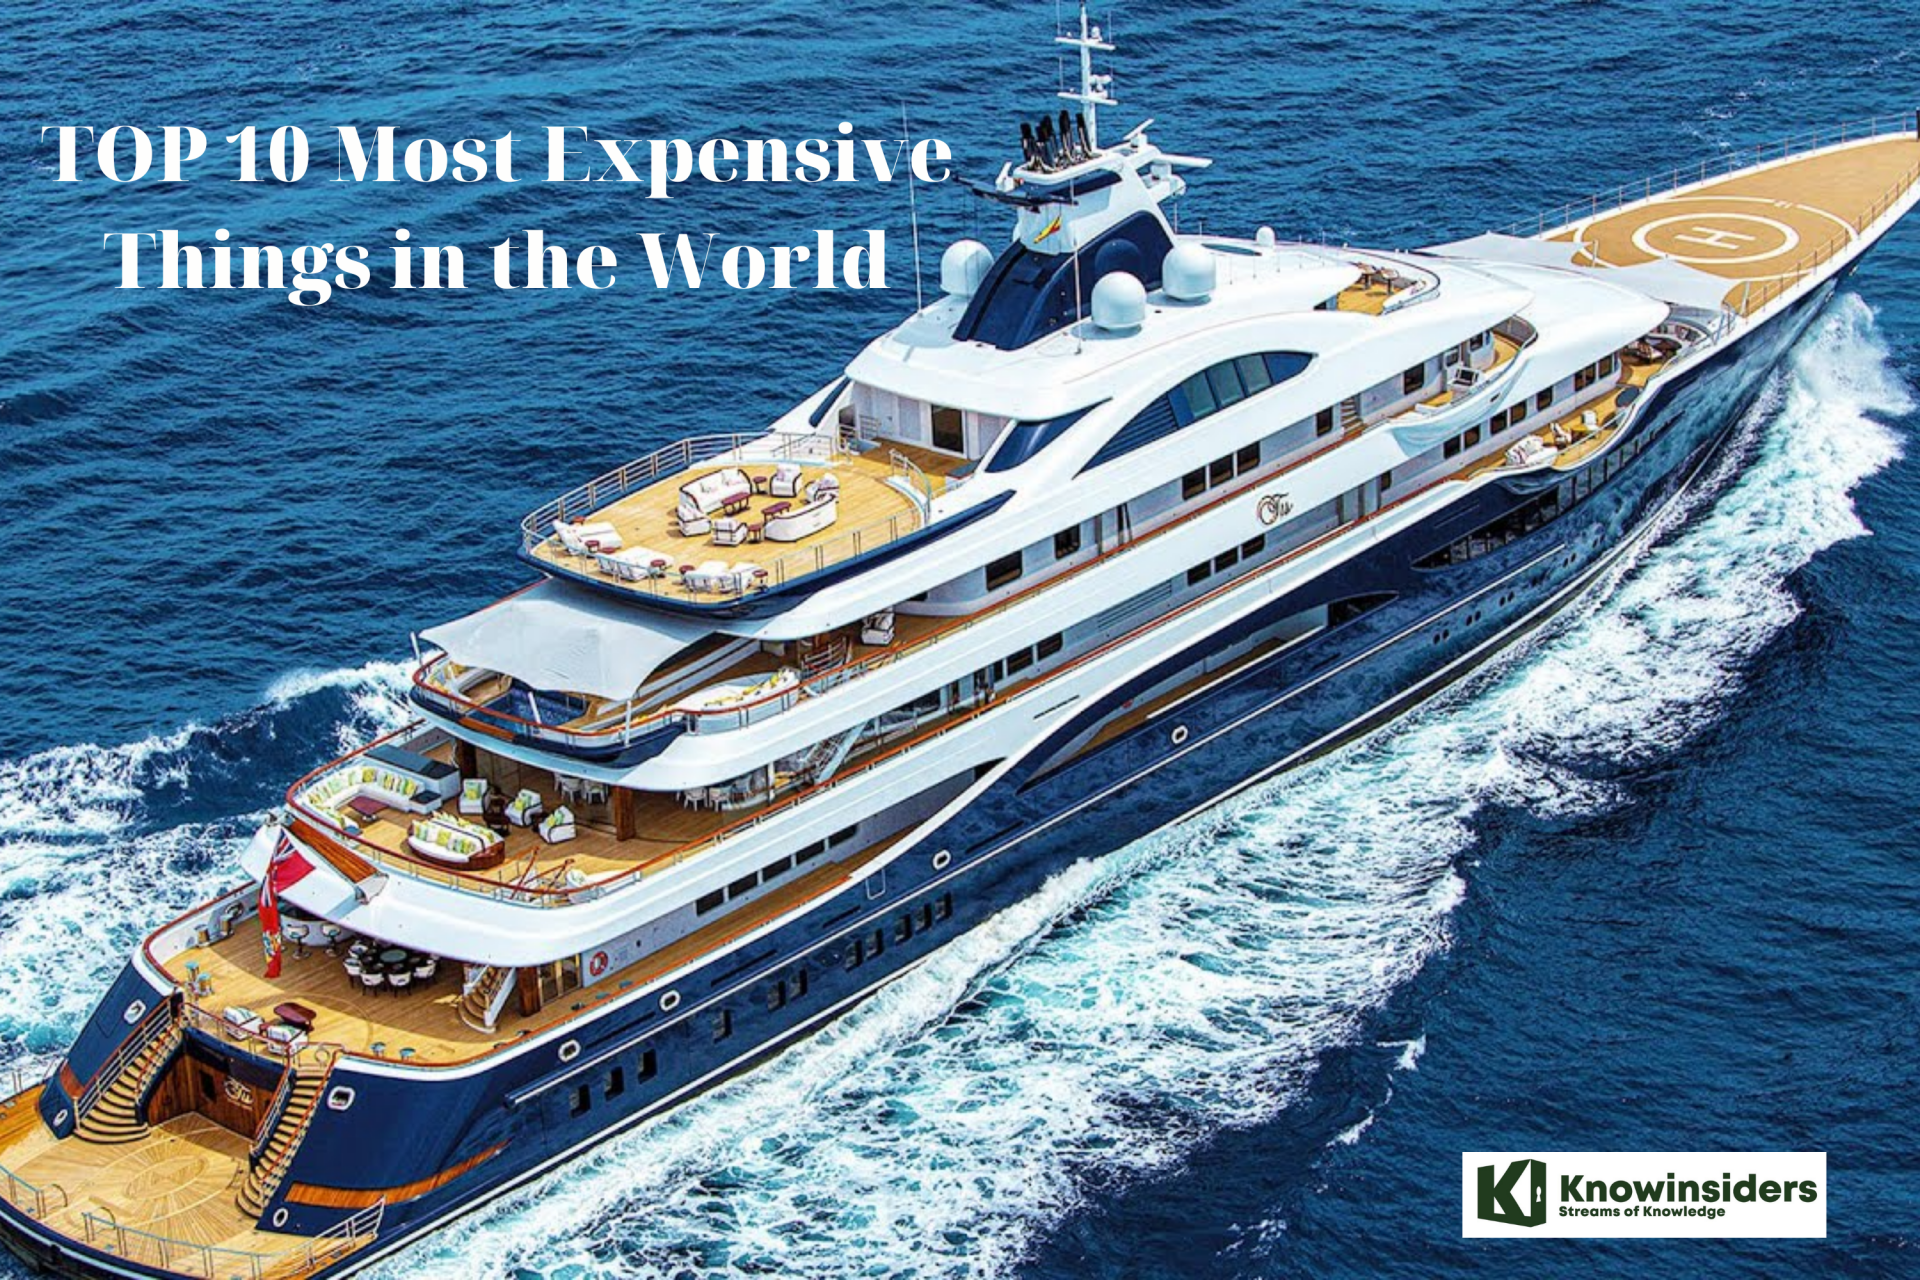 TOP 10 Most Expensive Things in the World